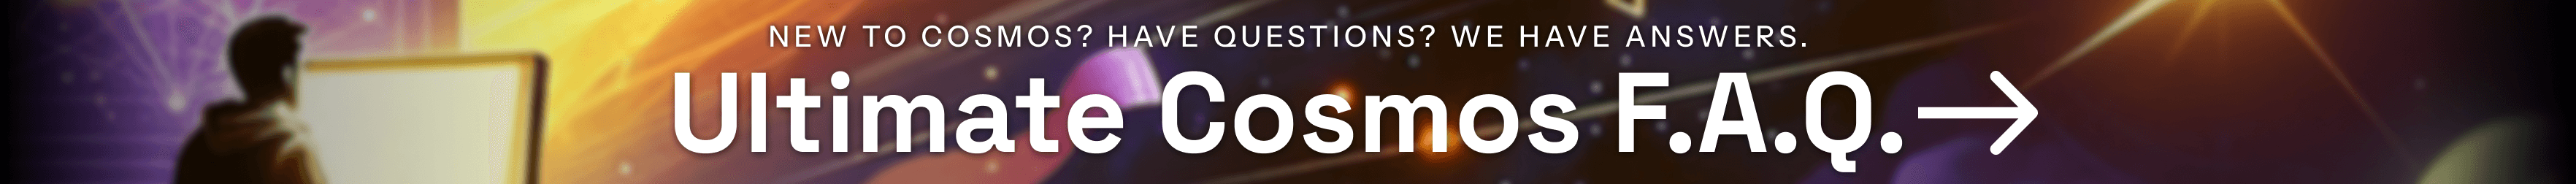 Find answers to any Cosmos question you may have, all in one place.